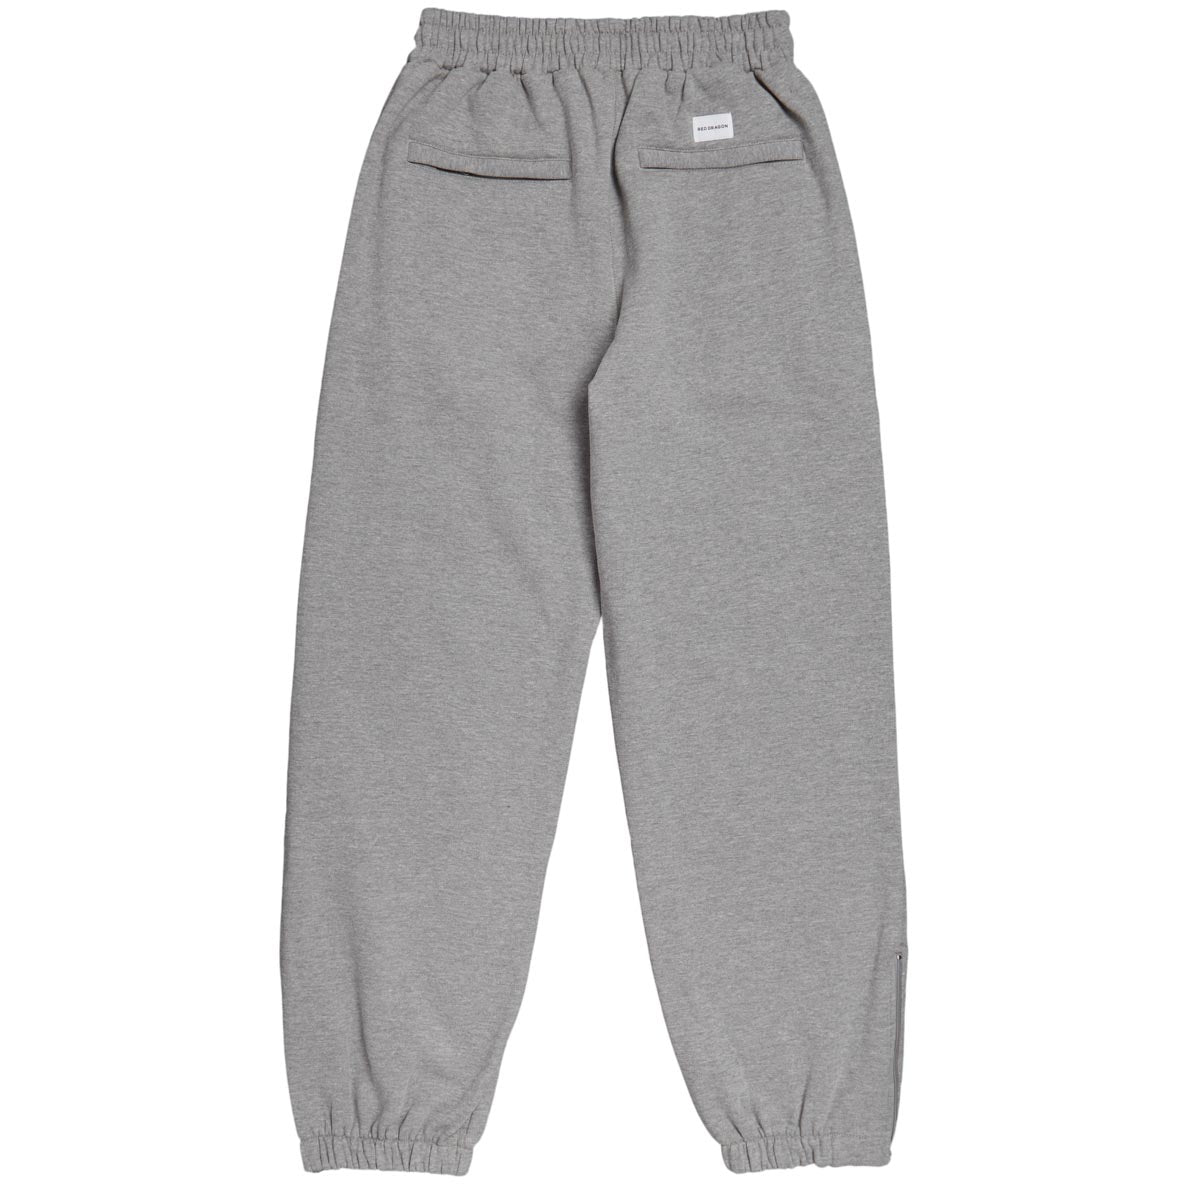 RDS Twill Monogram Sweat Pants - Athletic Heather/Red image 2